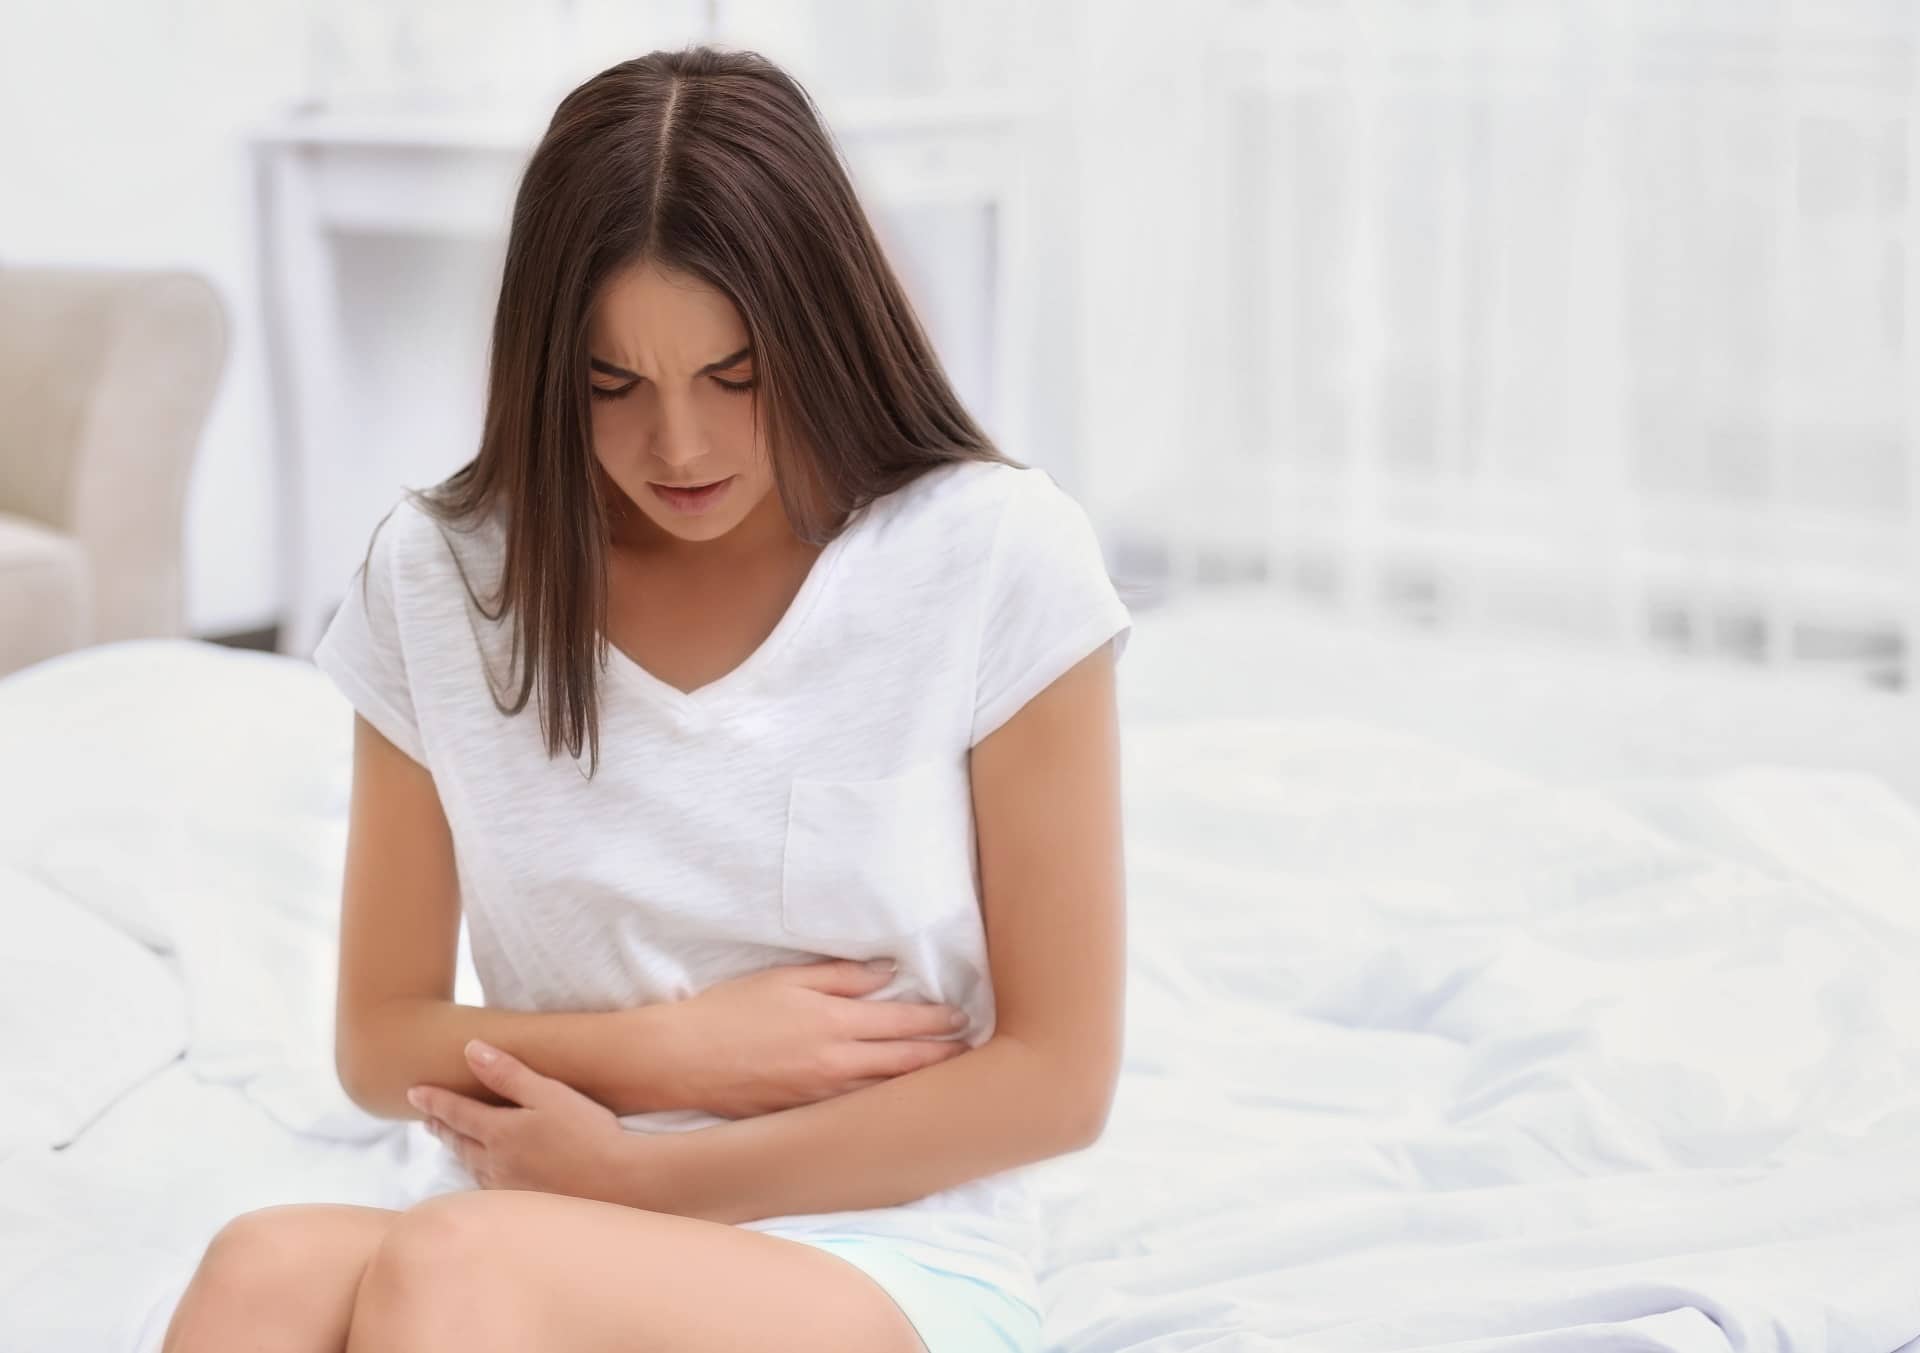 Can Women Conceive With PCOS - Can Women Conceive With PCOS?